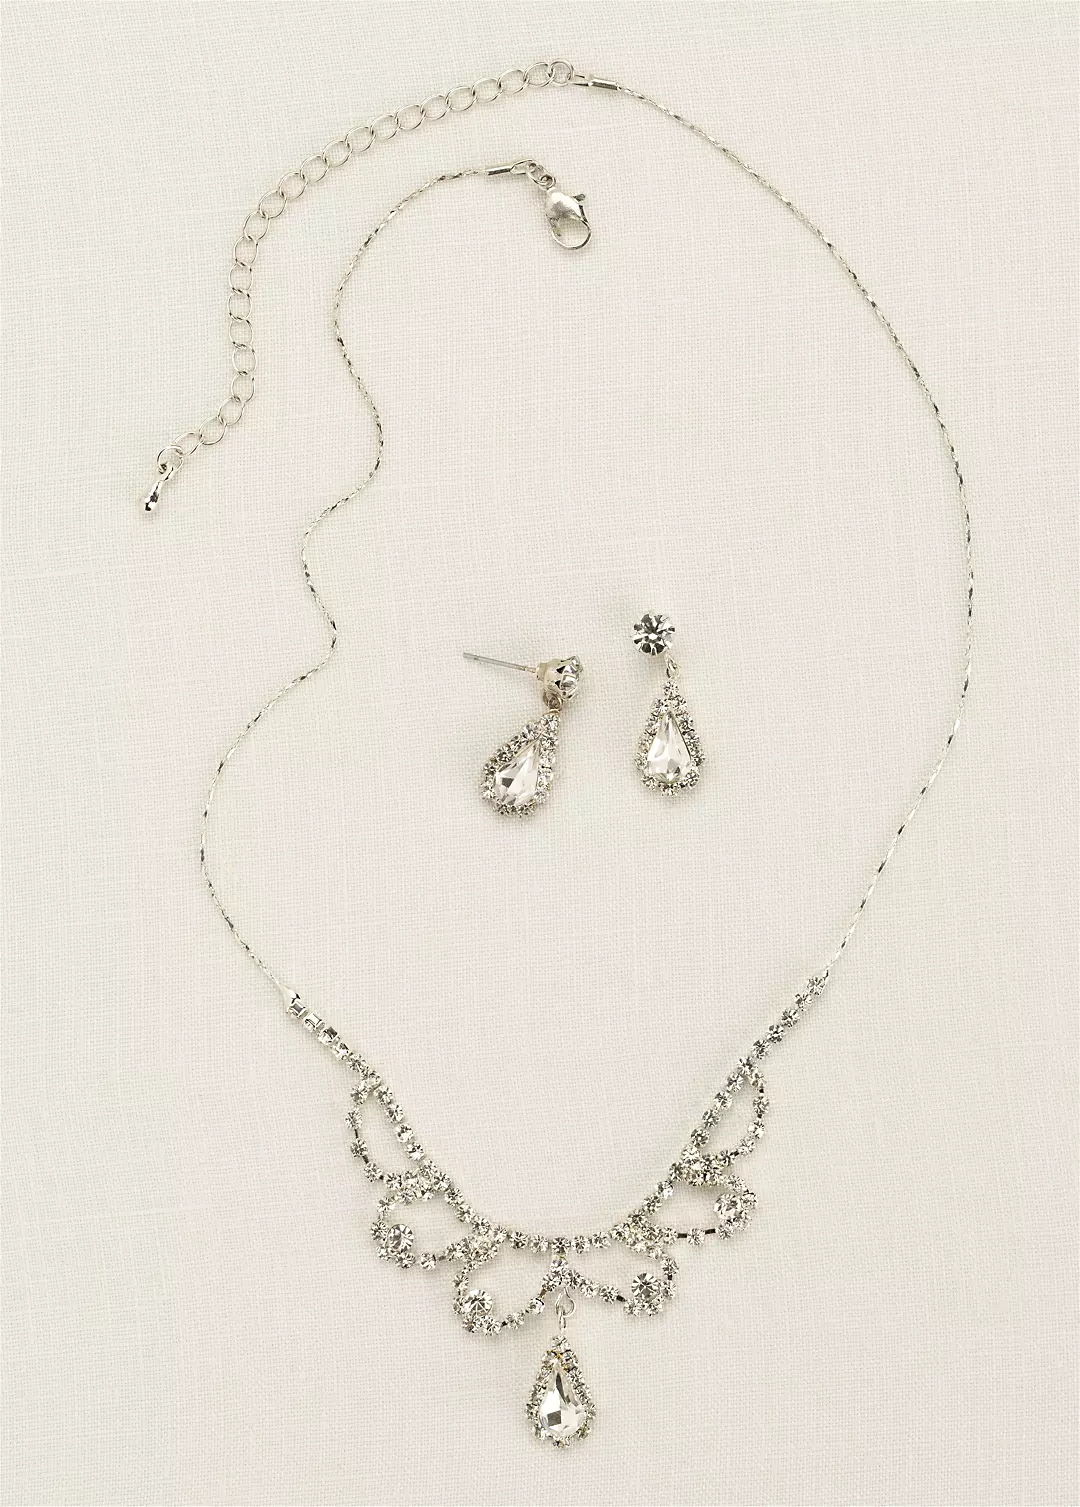 Scalloped Necklace with Pear Shaped Drop Earrings Image